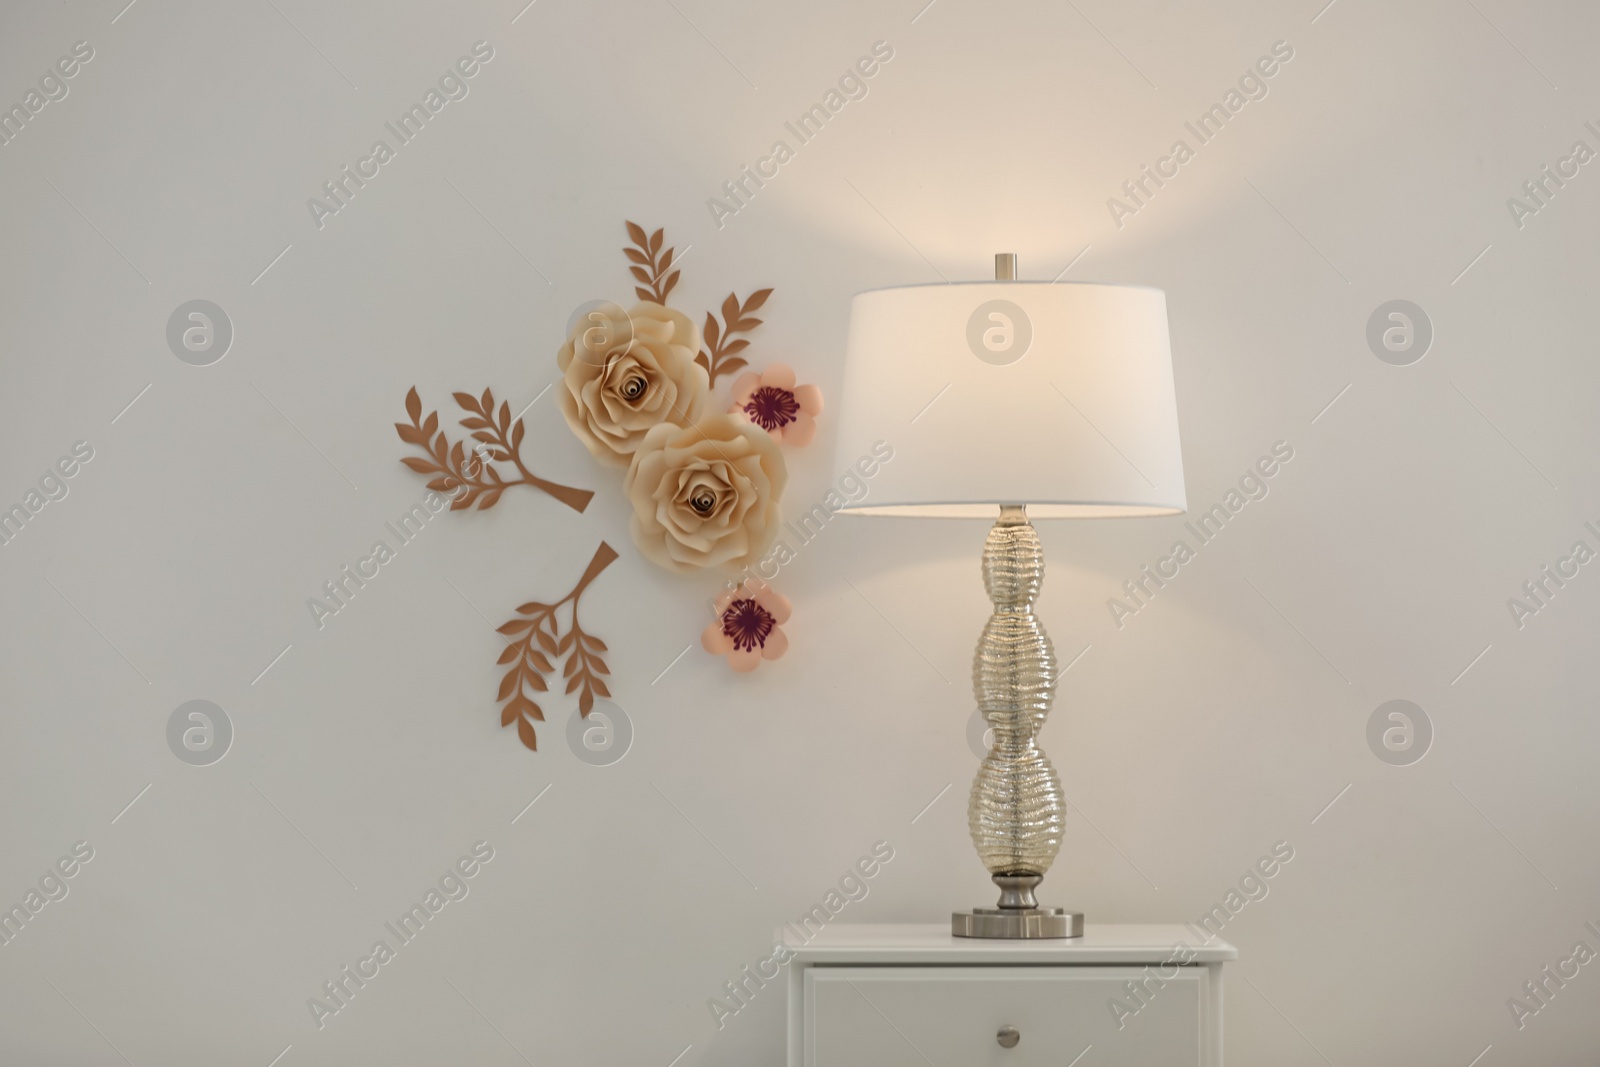 Photo of Stylish room interior with floral decor, table and lamp